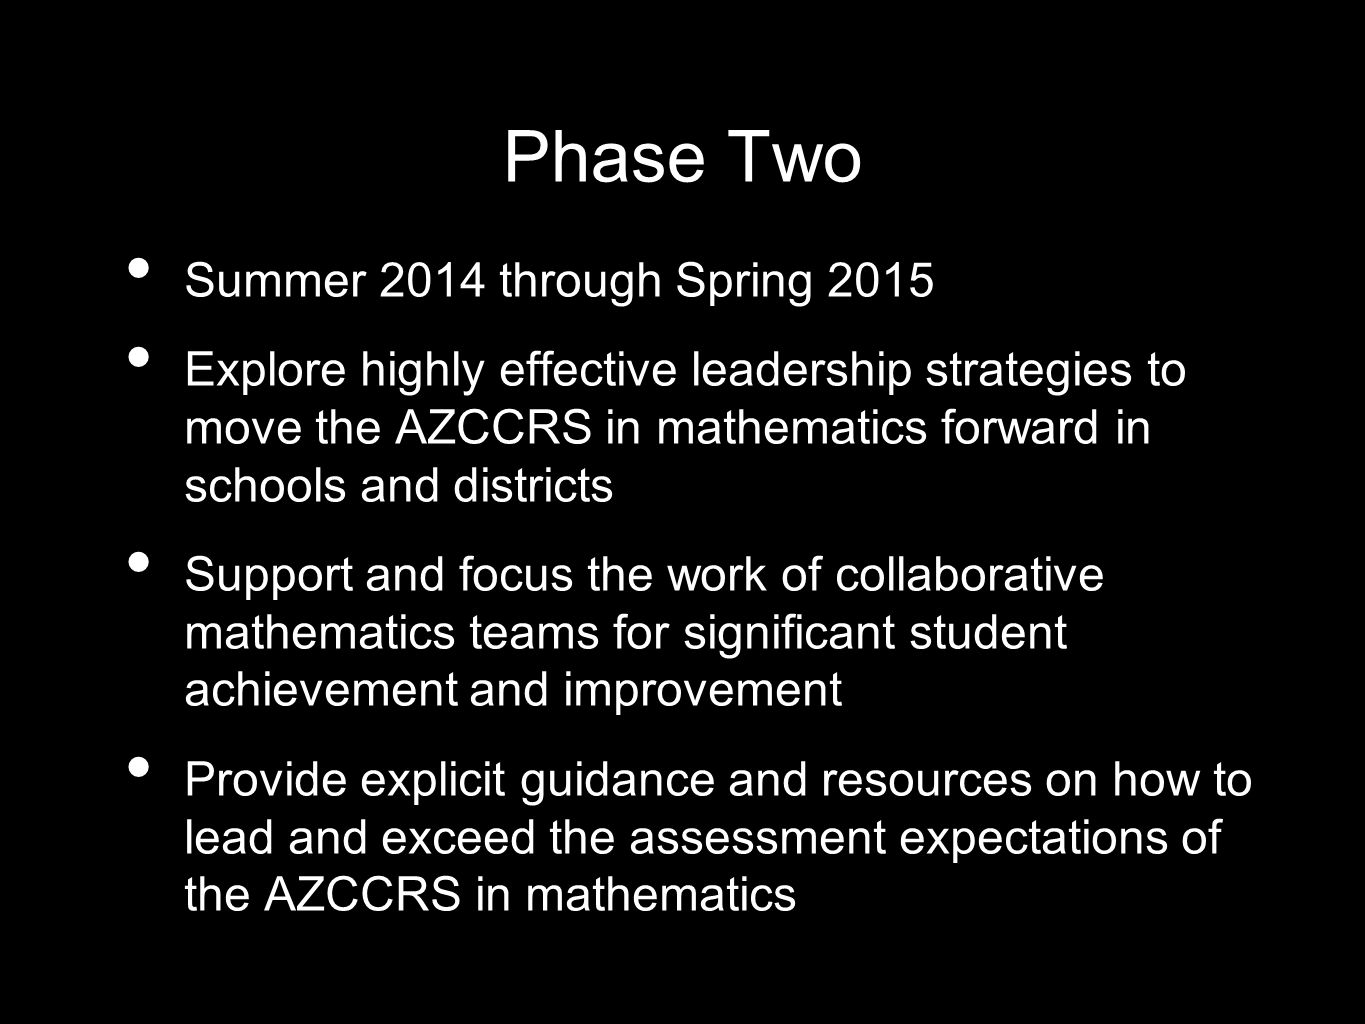 Phase Two Summer 2014 through Spring 2015 Explore highly effective leadership strategies to move the AZCCRS in mathematics forward in schools and districts Support and focus the work of collaborative mathematics teams for significant student achievement and improvement Provide explicit guidance and resources on how to lead and exceed the assessment expectations of the AZCCRS in mathematics